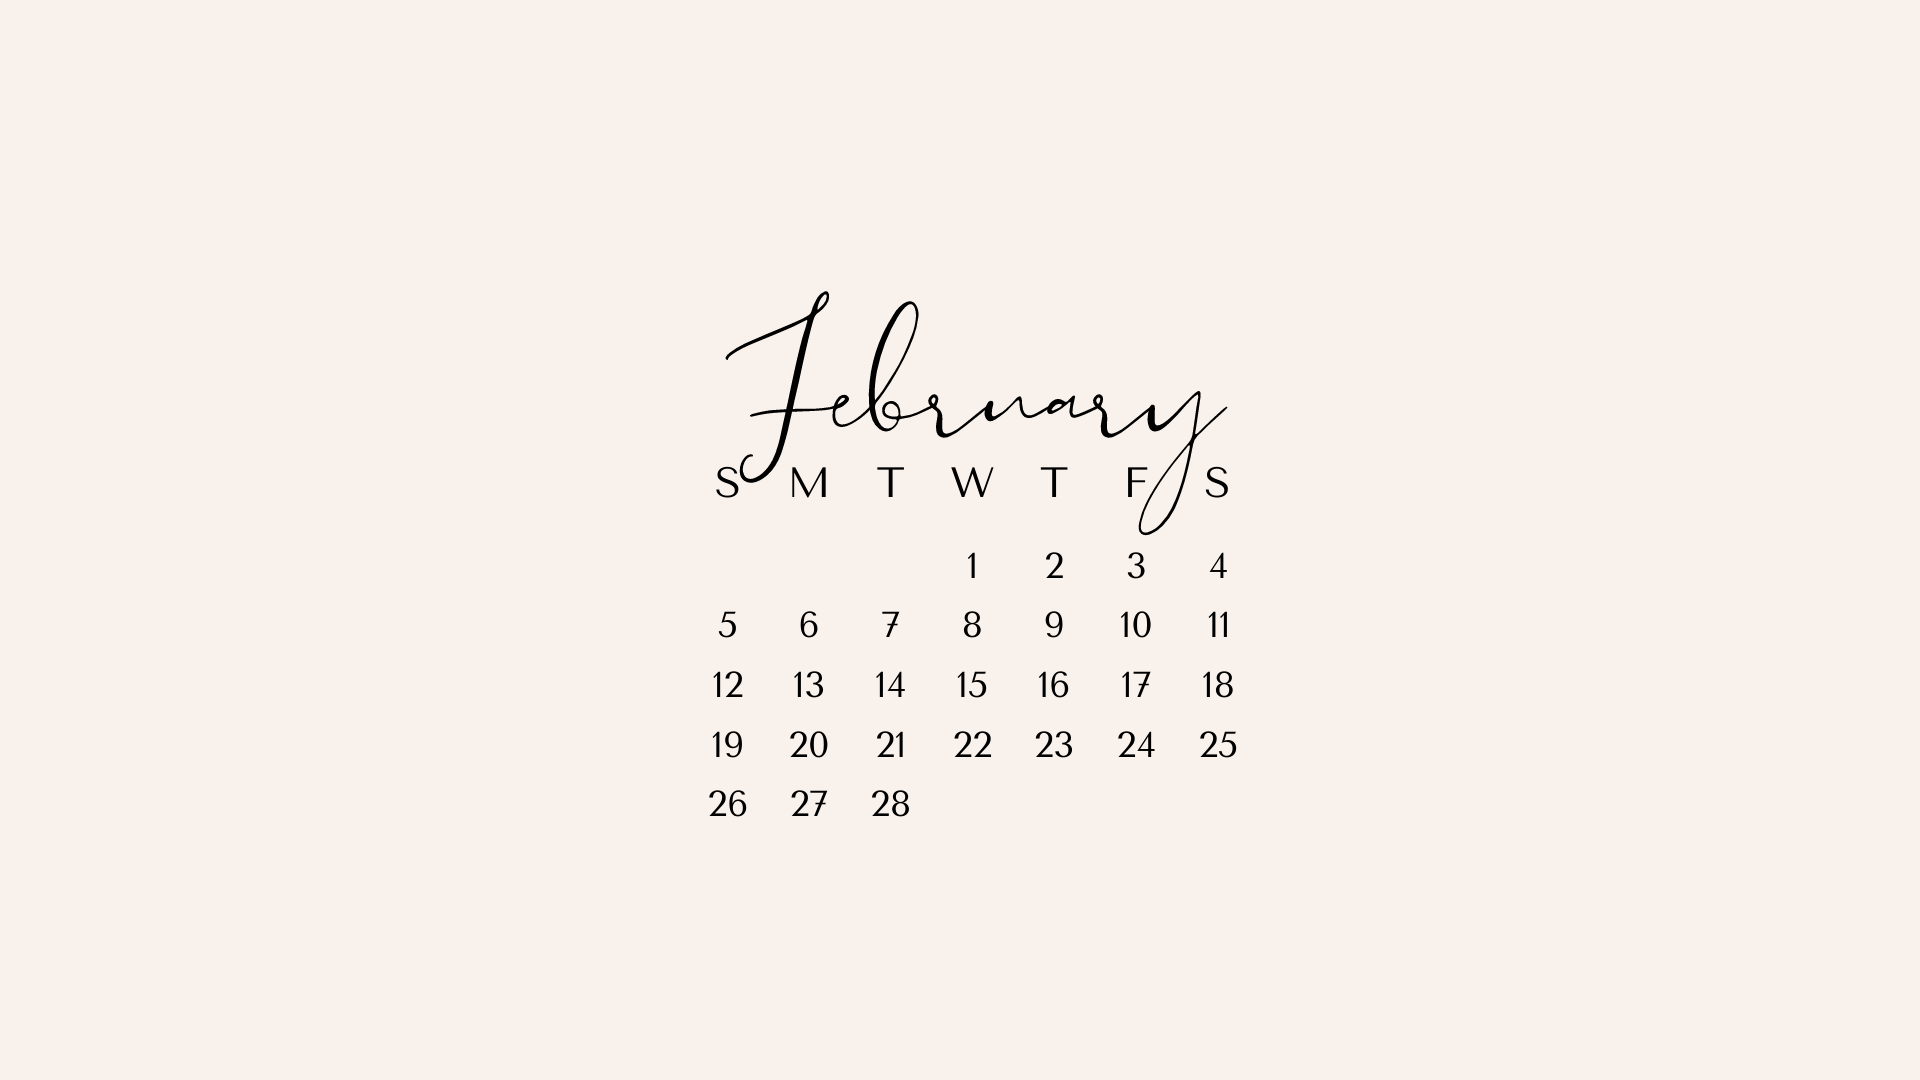 FEBRUARY 2023 desktop calendar backgrounds;  Here are your free February backgrounds for computers and laptops. Tech freebies for this month!